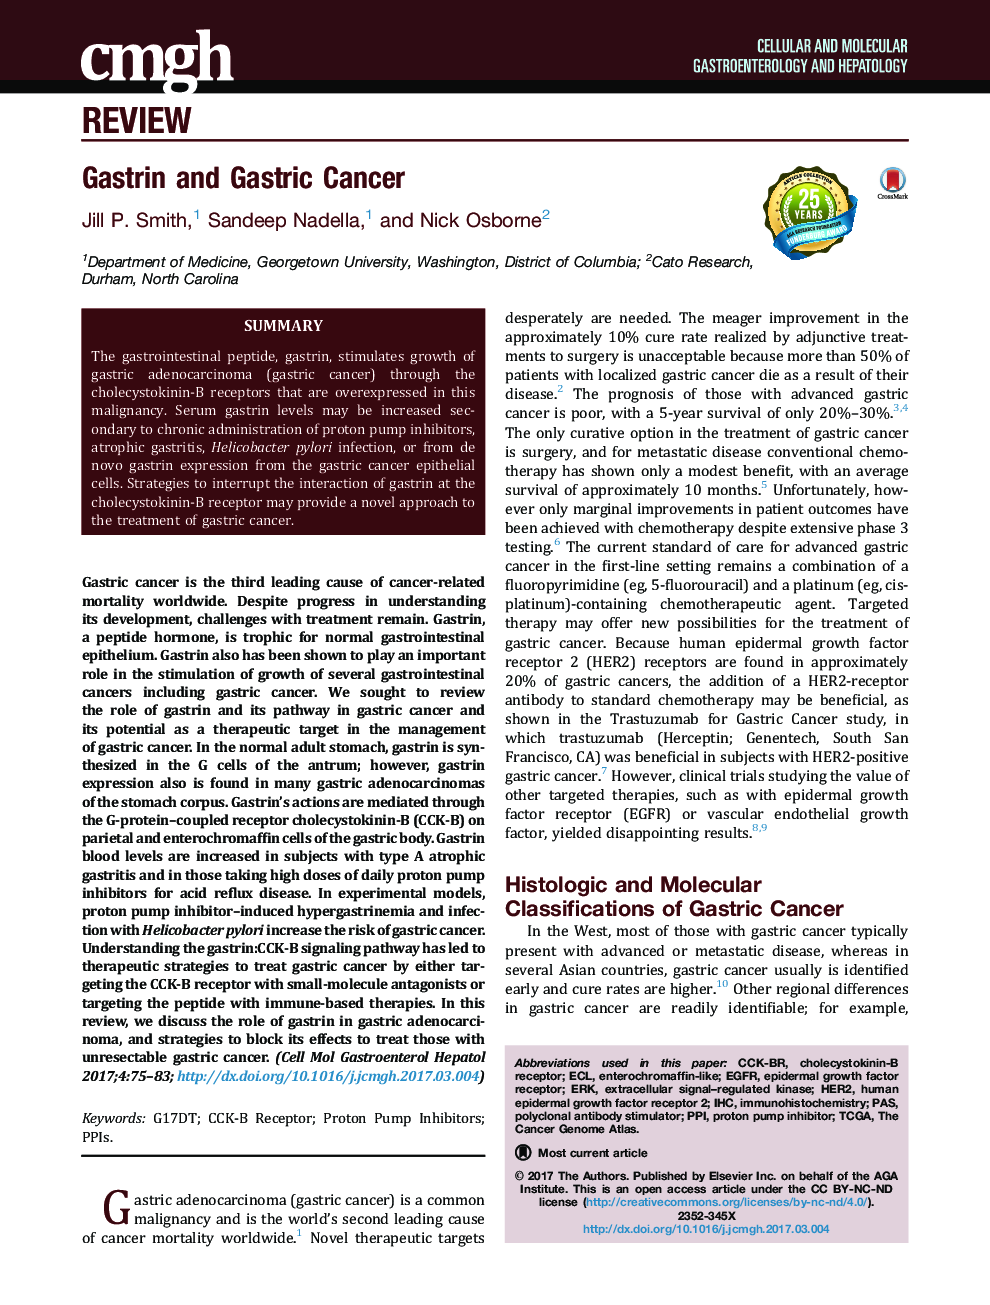 Gastrin and Gastric Cancer